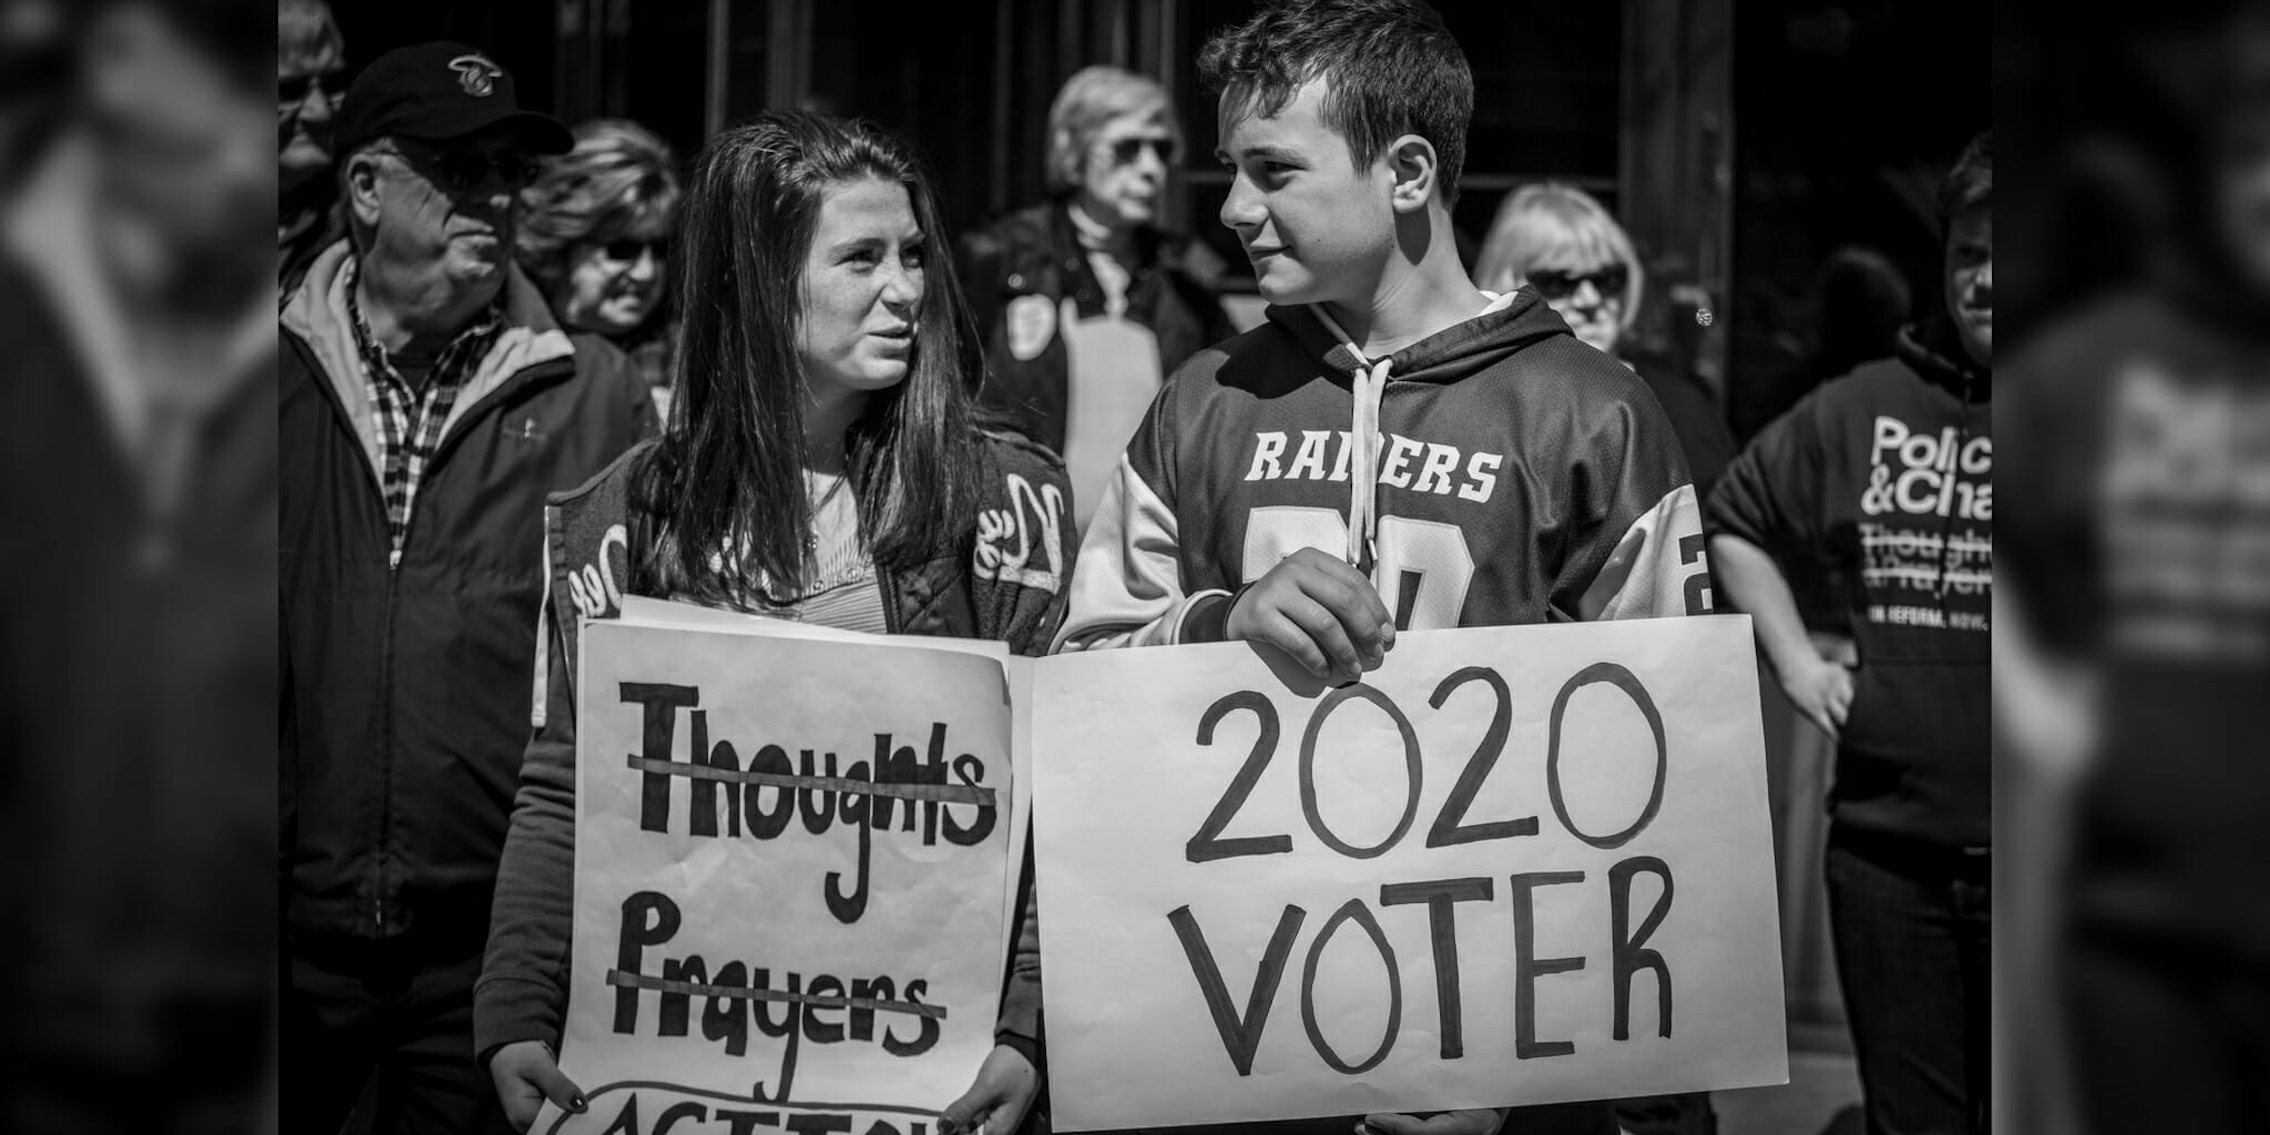 March for our Lives protesters holding a '2020 Voter' sign in Washington, D.C.